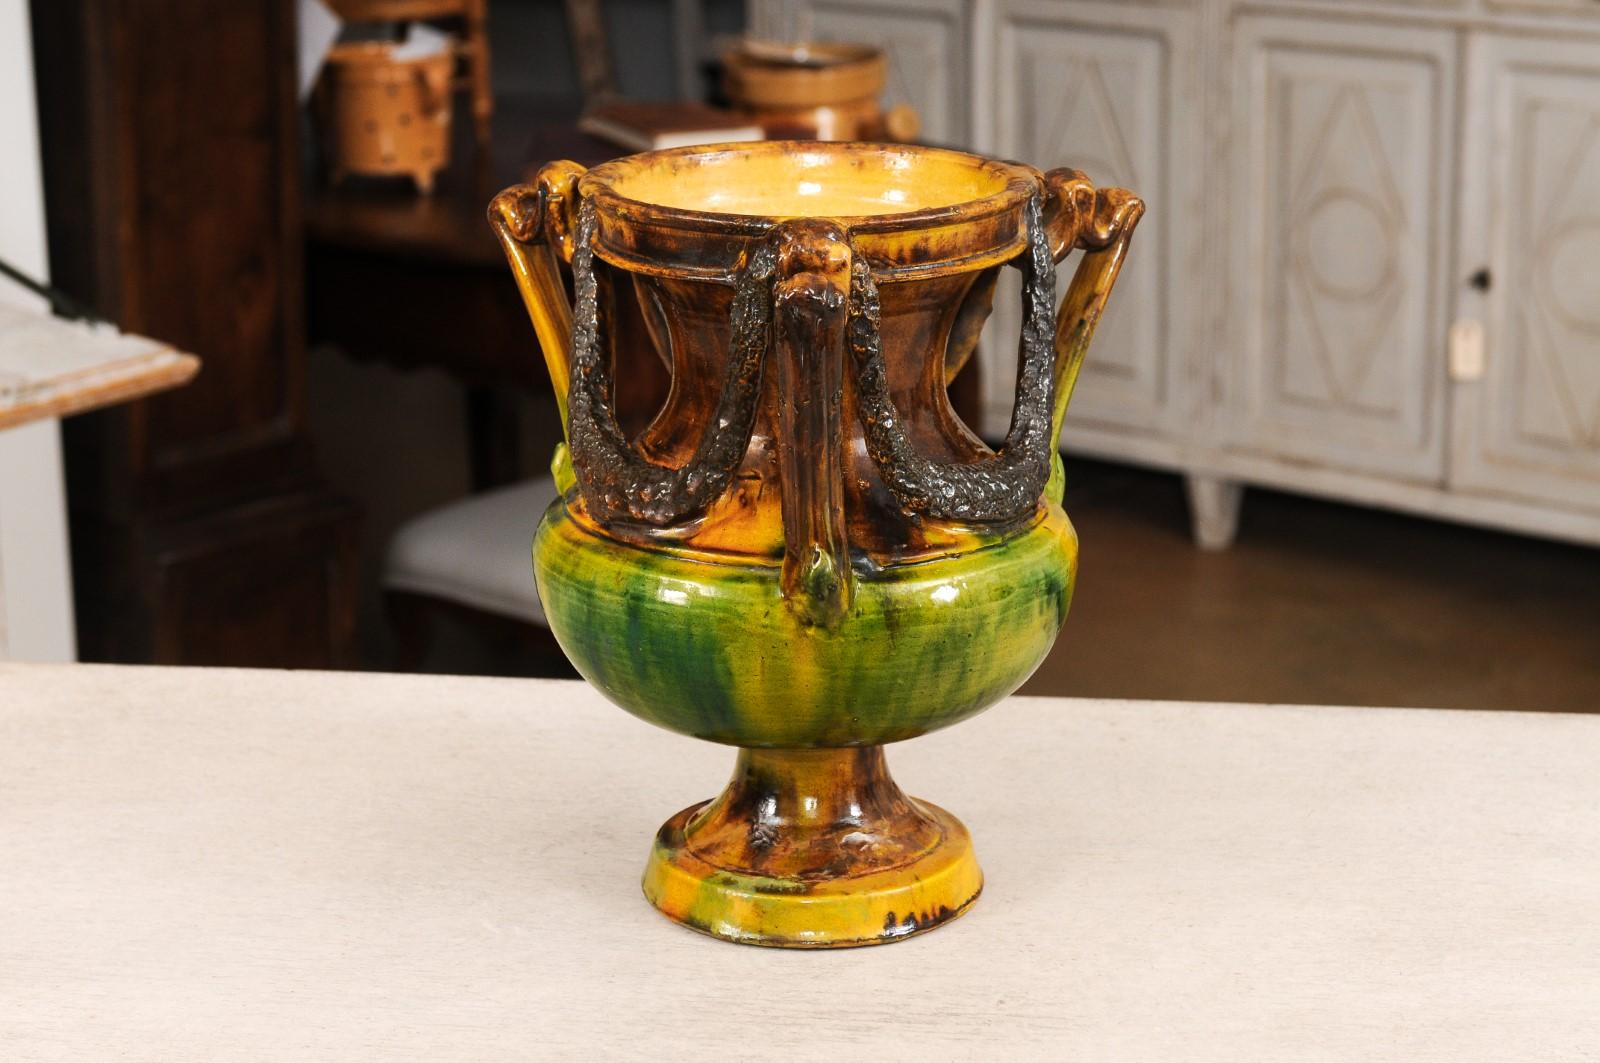 French Classical 19th Century Anduze Multi-Colored Glazed Vase with Swag Motifs For Sale 8